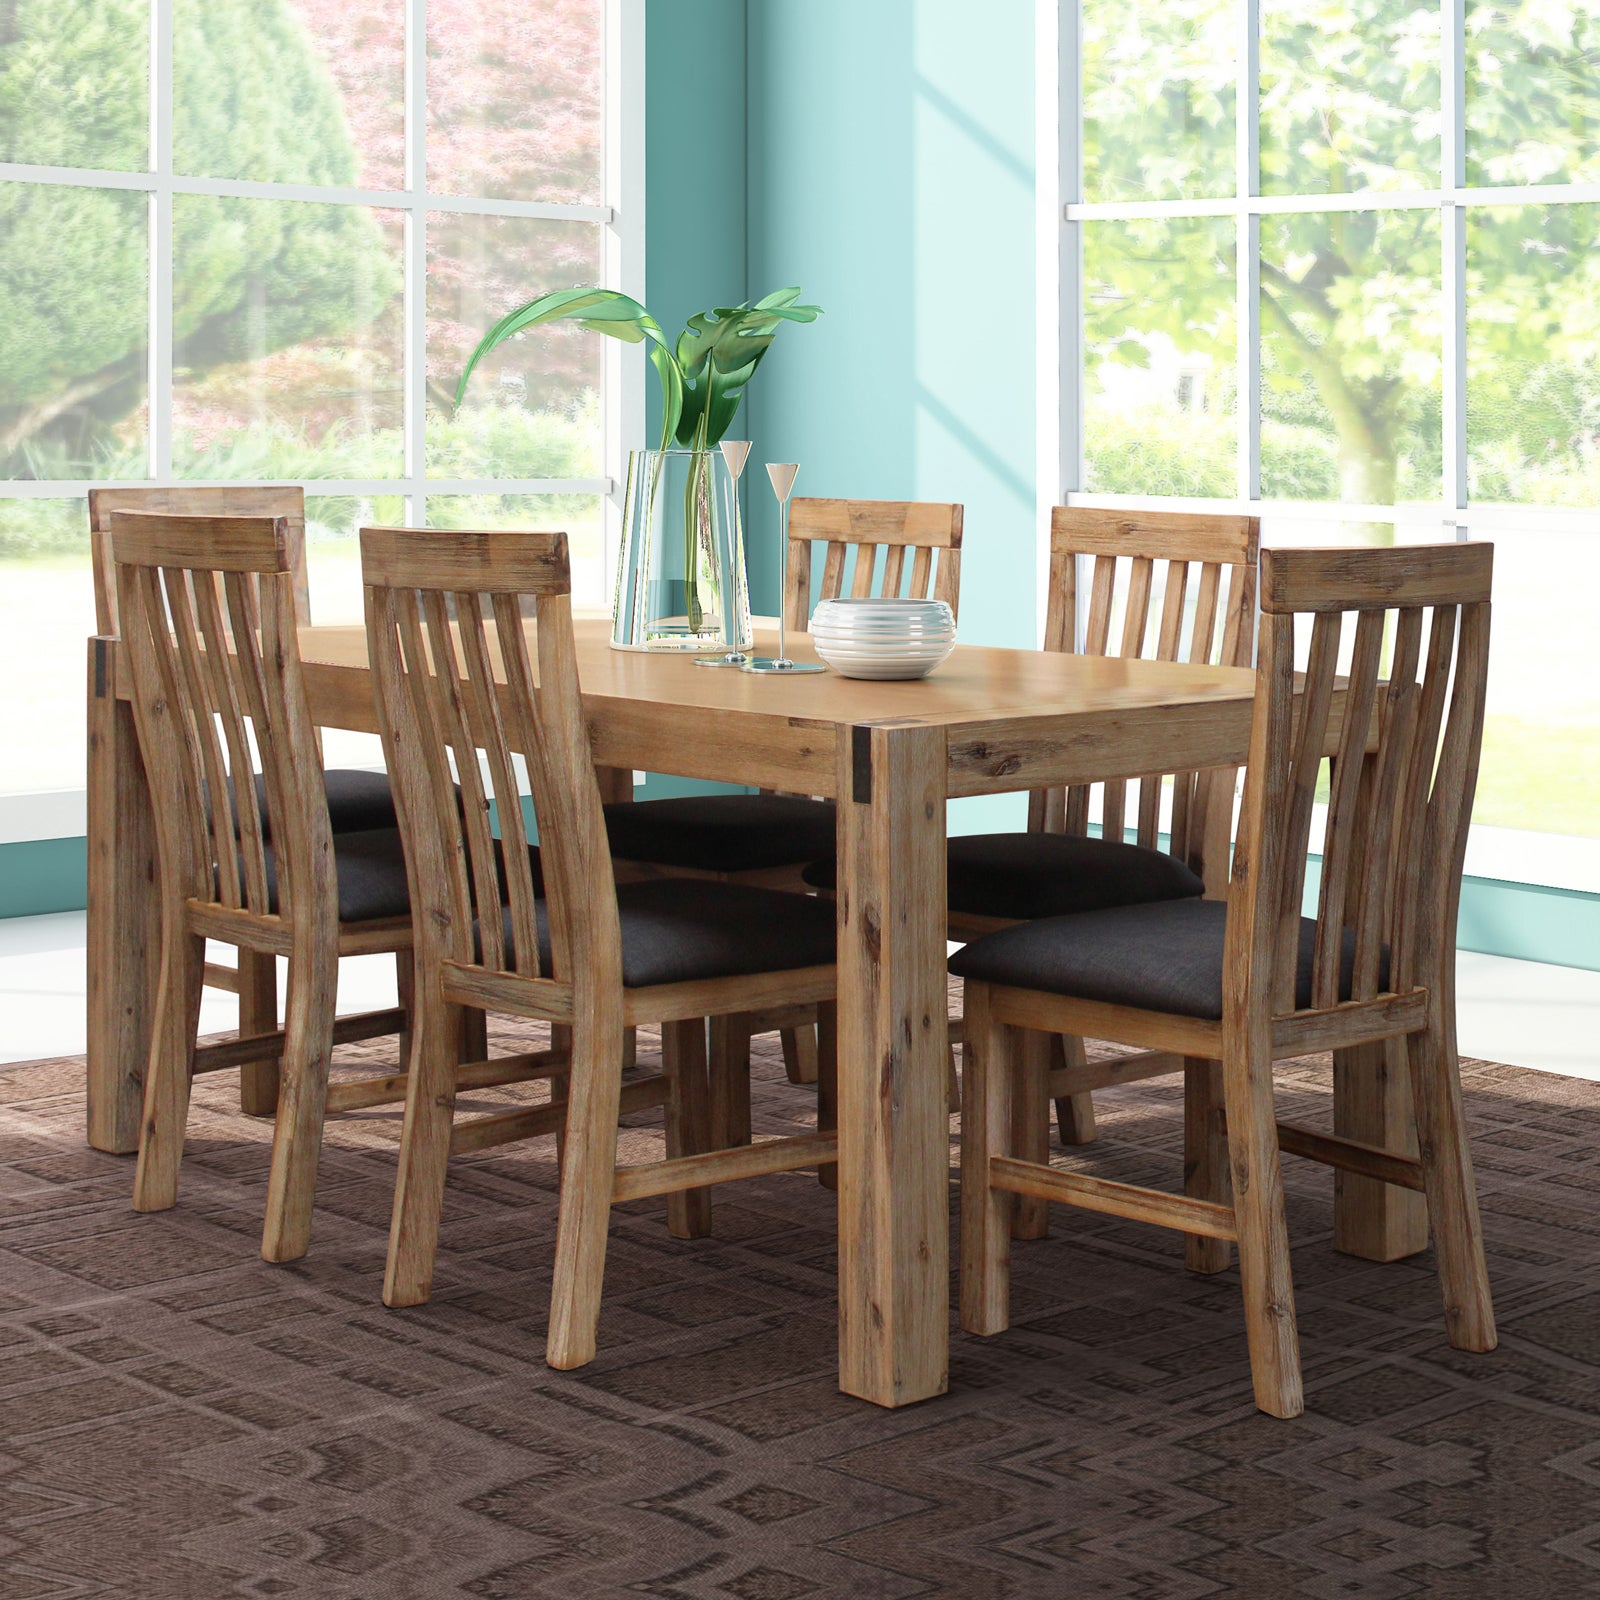 Nowra Solid Acacia Timber Large Size Oak Colour Dining Table With 8X Linen Upholstered Chair